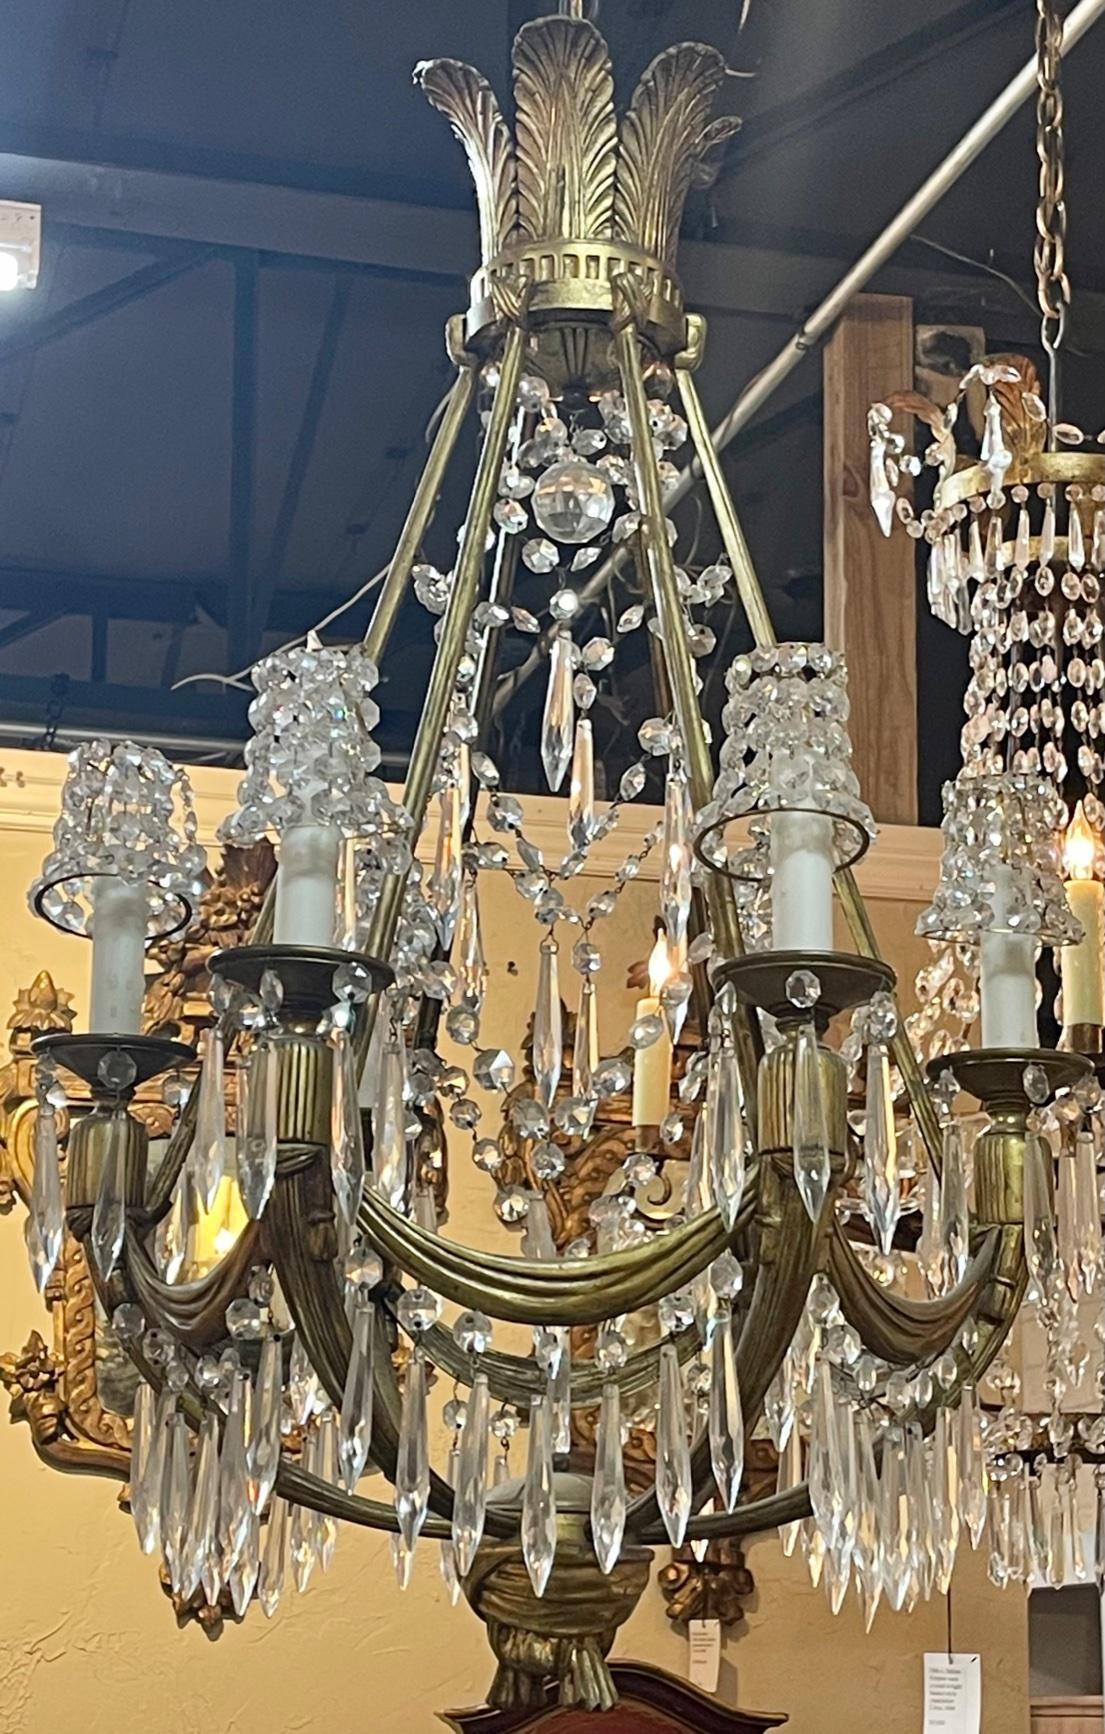 French bronze and crystal Empire style chandelier. Circa 1920. The chandelier has been professionally re-wired, cleaned and is ready to hang. Includes matching chain and canopy.